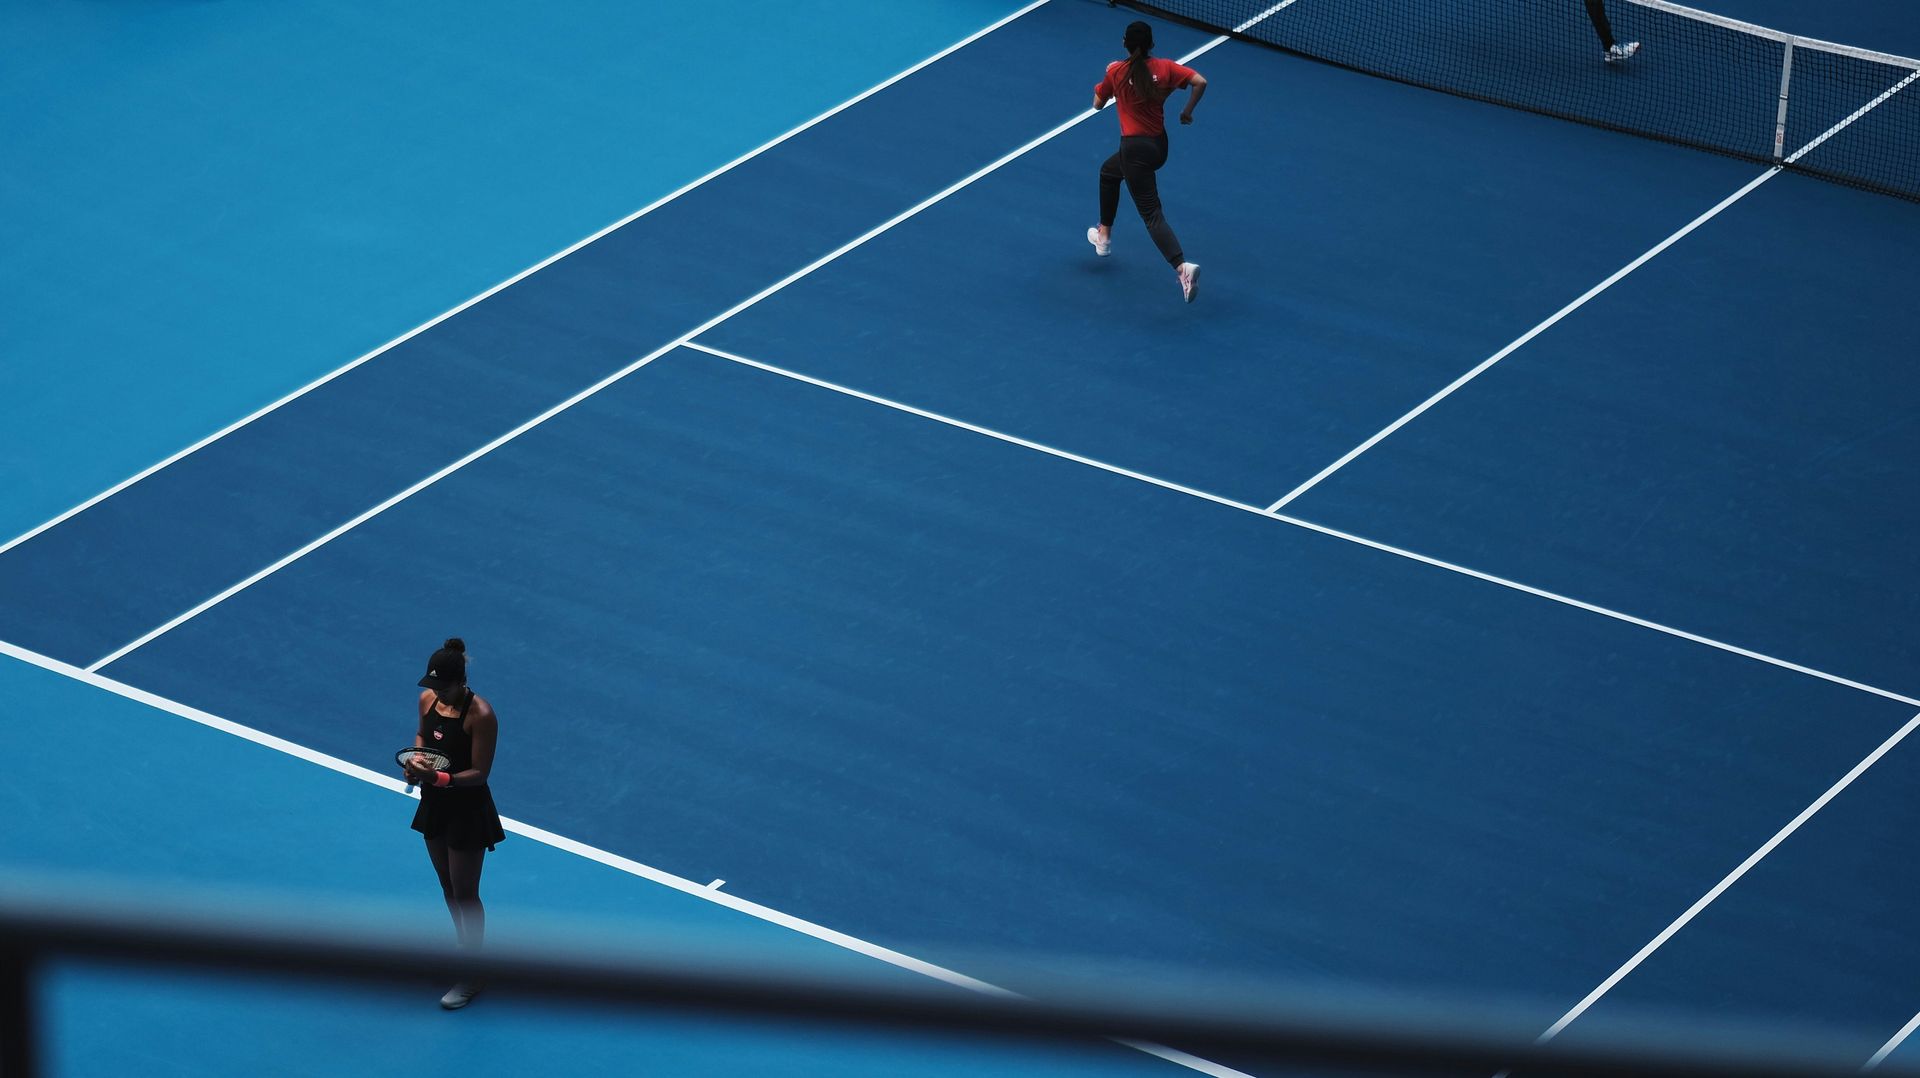 Two people are playing tennis on a blue court.